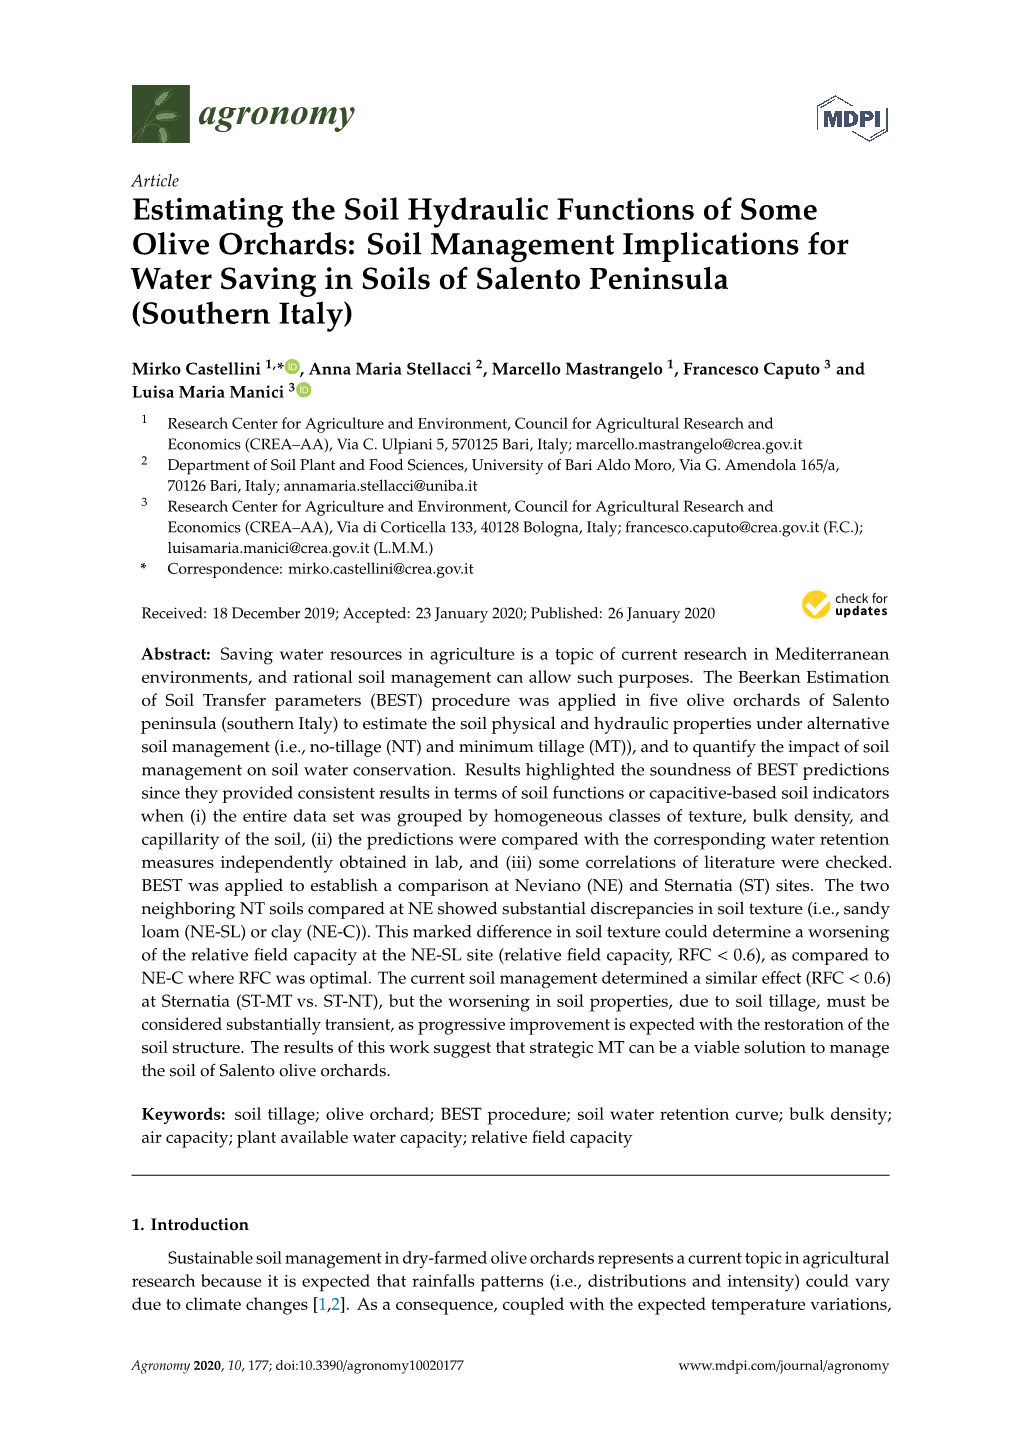 Estimating the Soil Hydraulic Functions of Some Olive Orchards: Soil Management Implications for Water Saving in Soils of Salento Peninsula (Southern Italy)